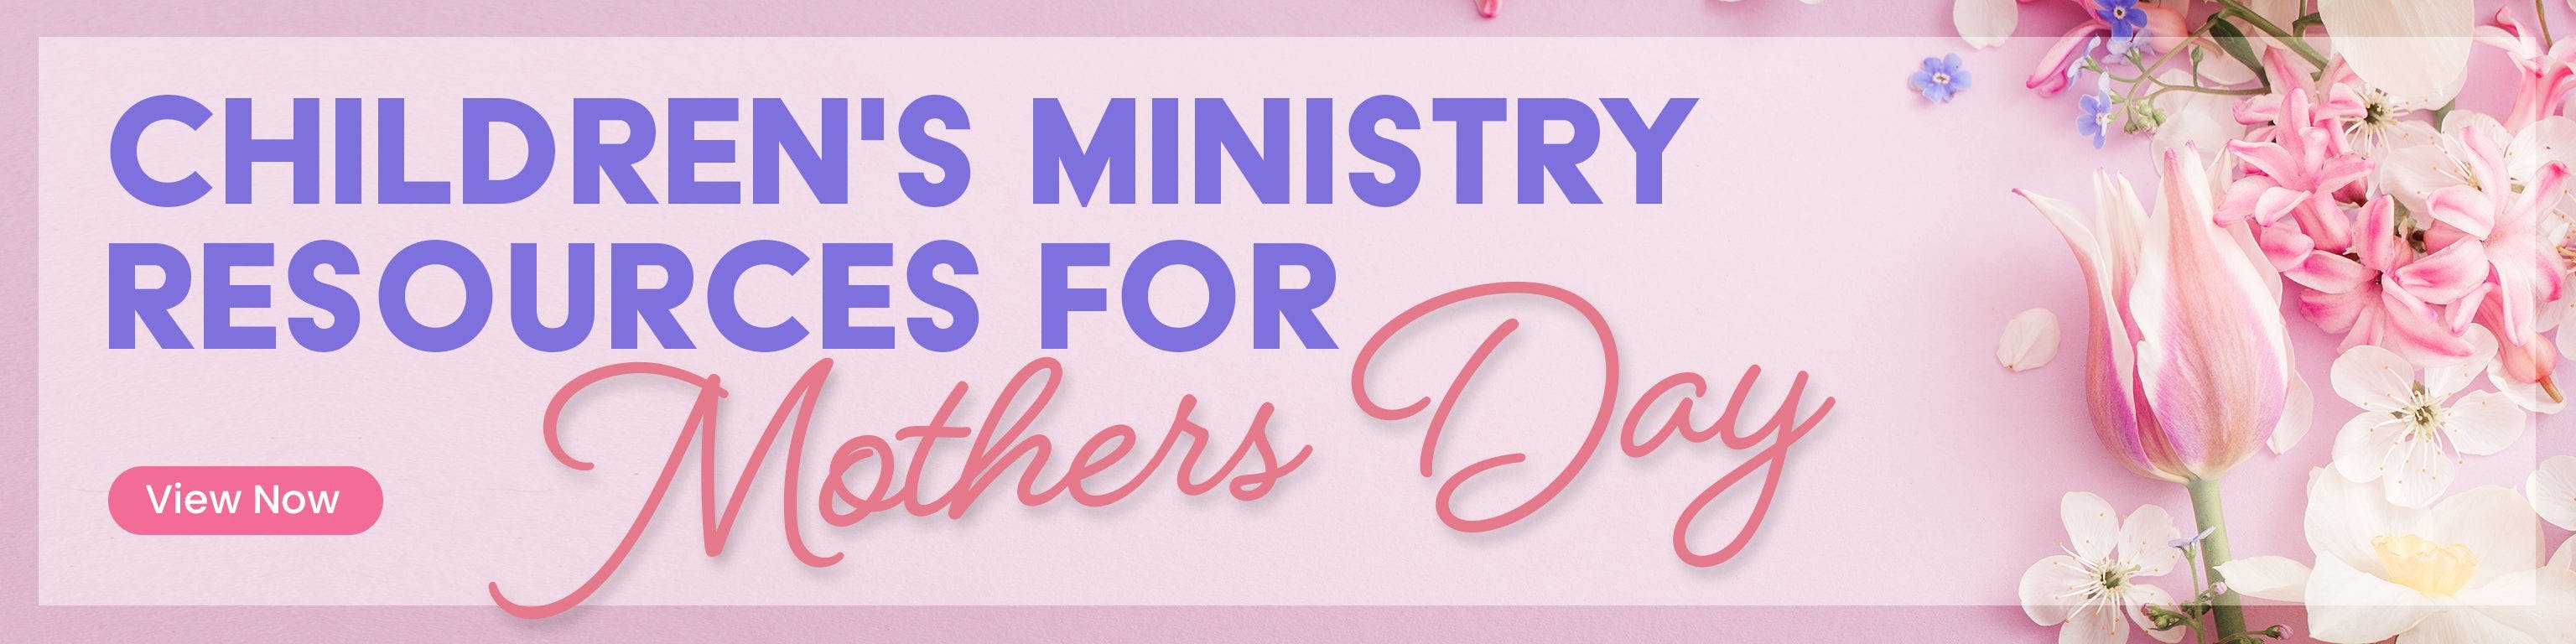 Children's Ministry Resources for Mother's Day